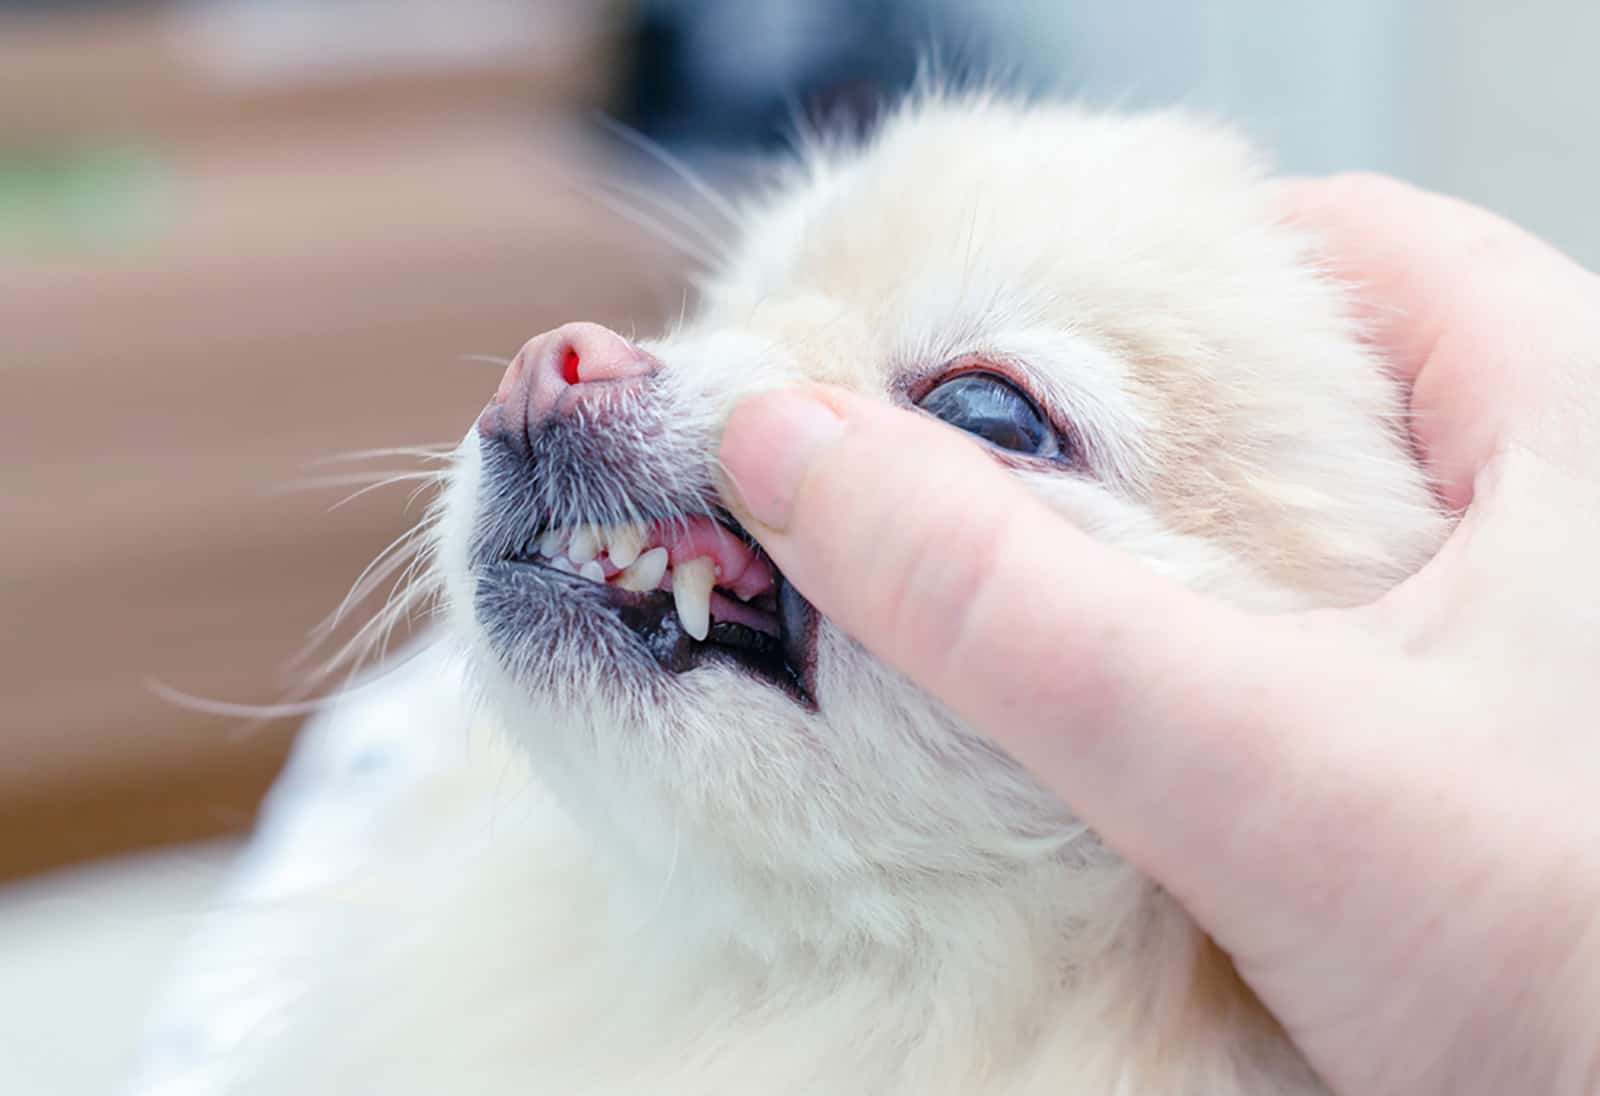 a person examining dog's gums to check color